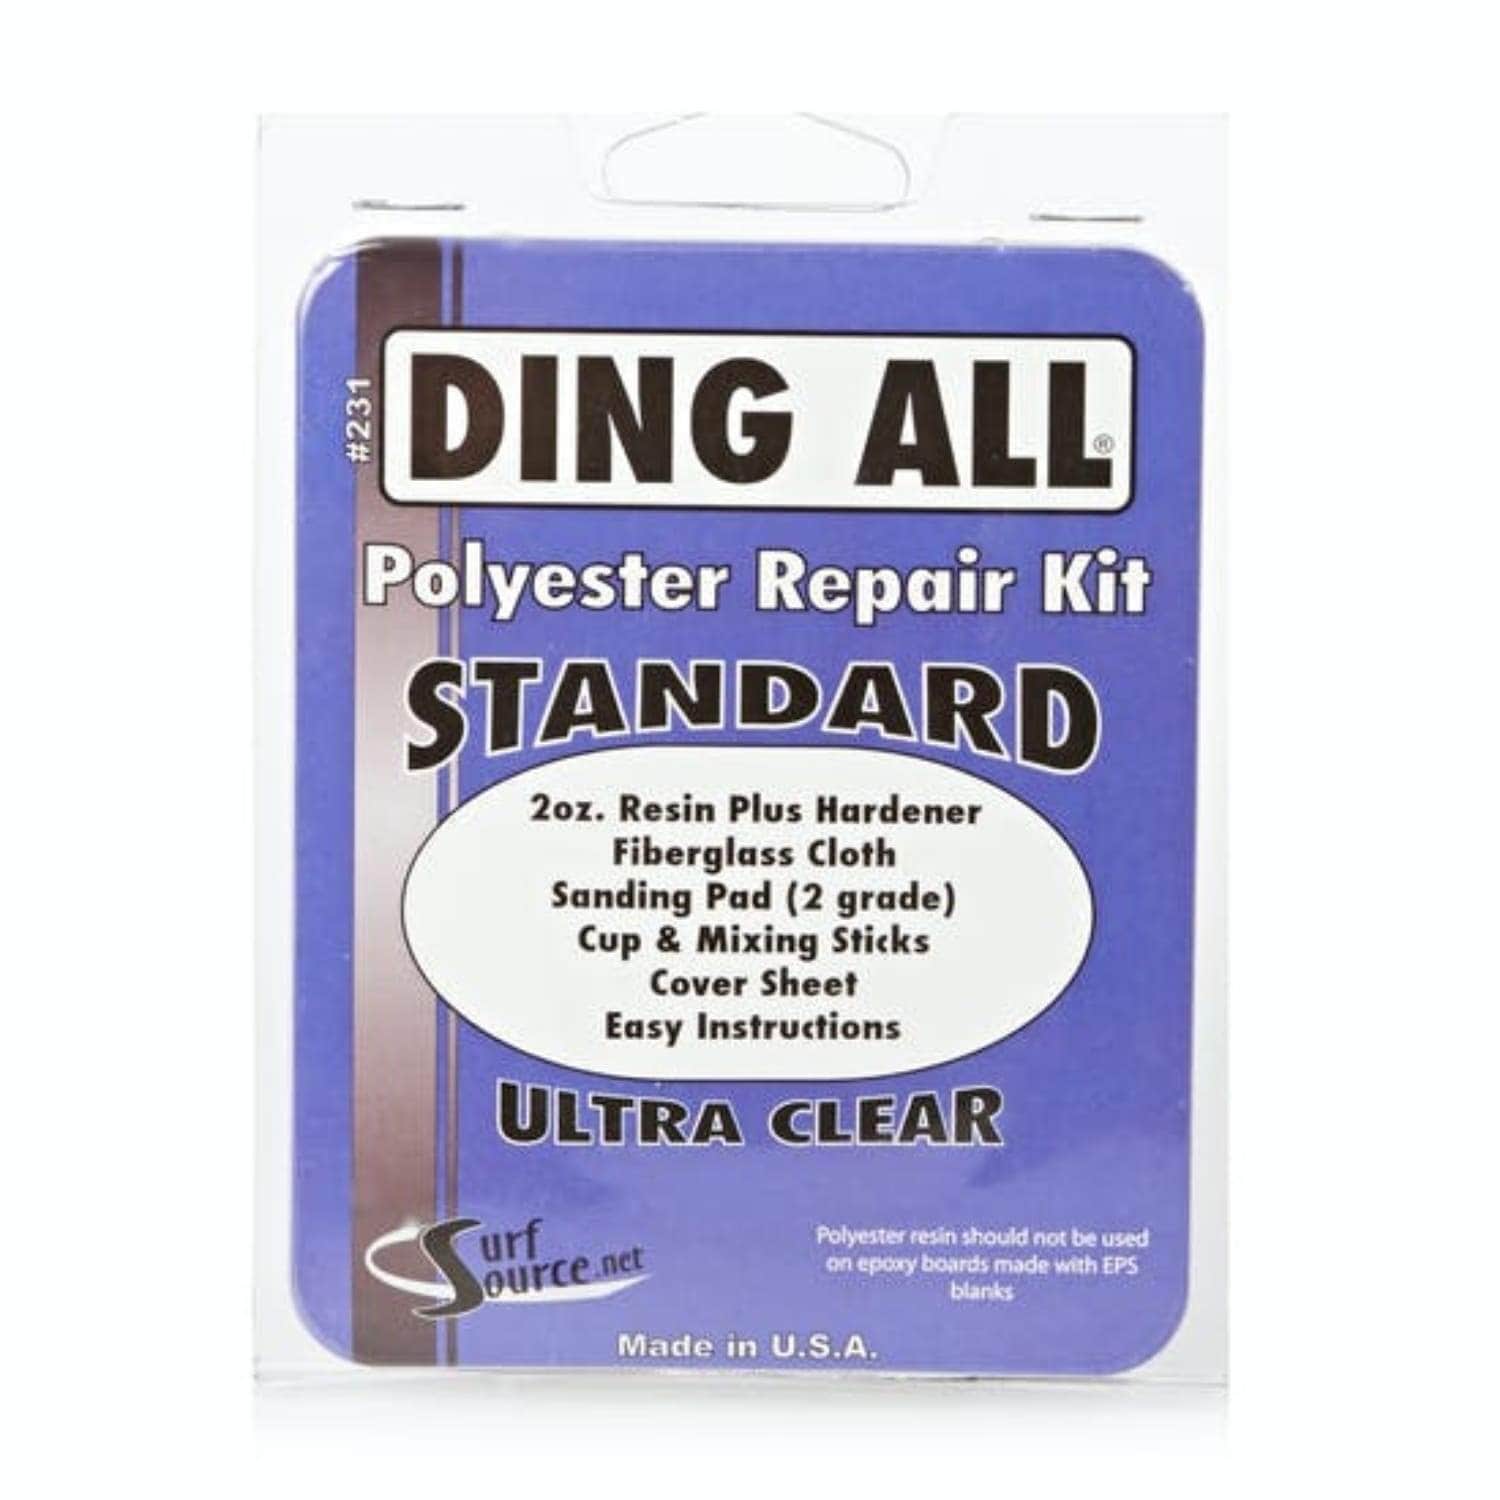 Ding All Standard Ultra Clear Polyester Repair Kit - 2oz Purple - Polyester Resin Surfboard Repair by Ding All 2oz